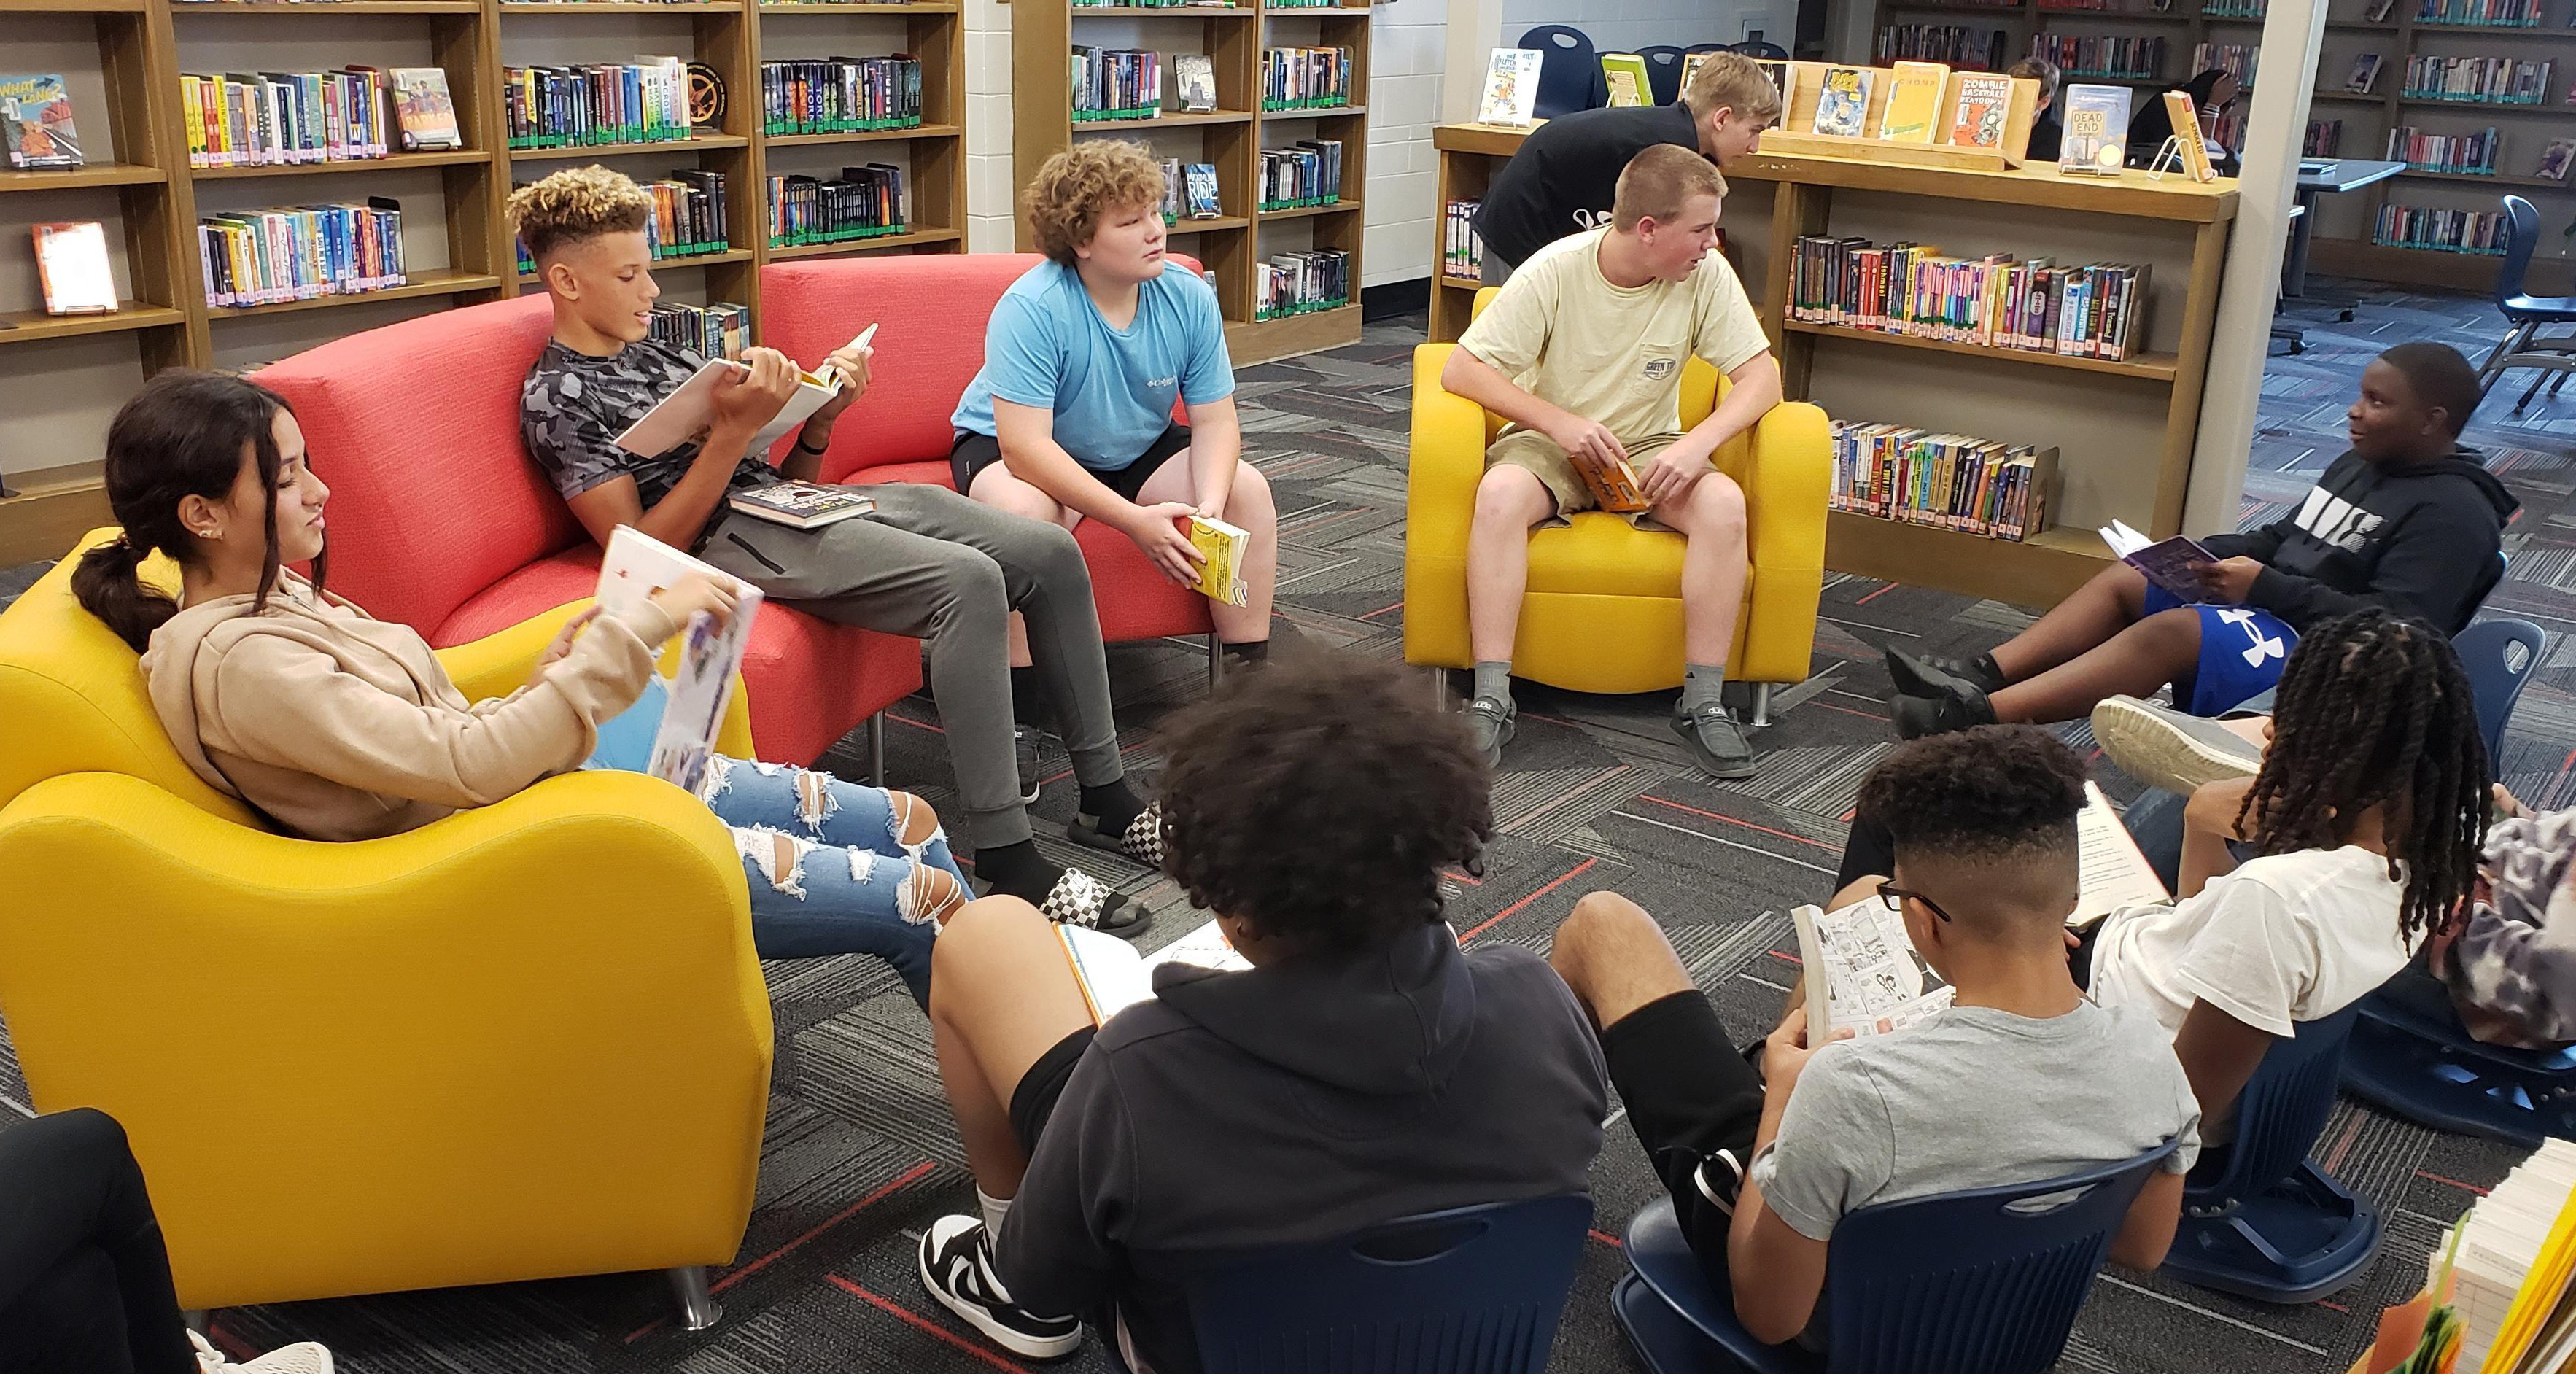 A group of students reading books in the library